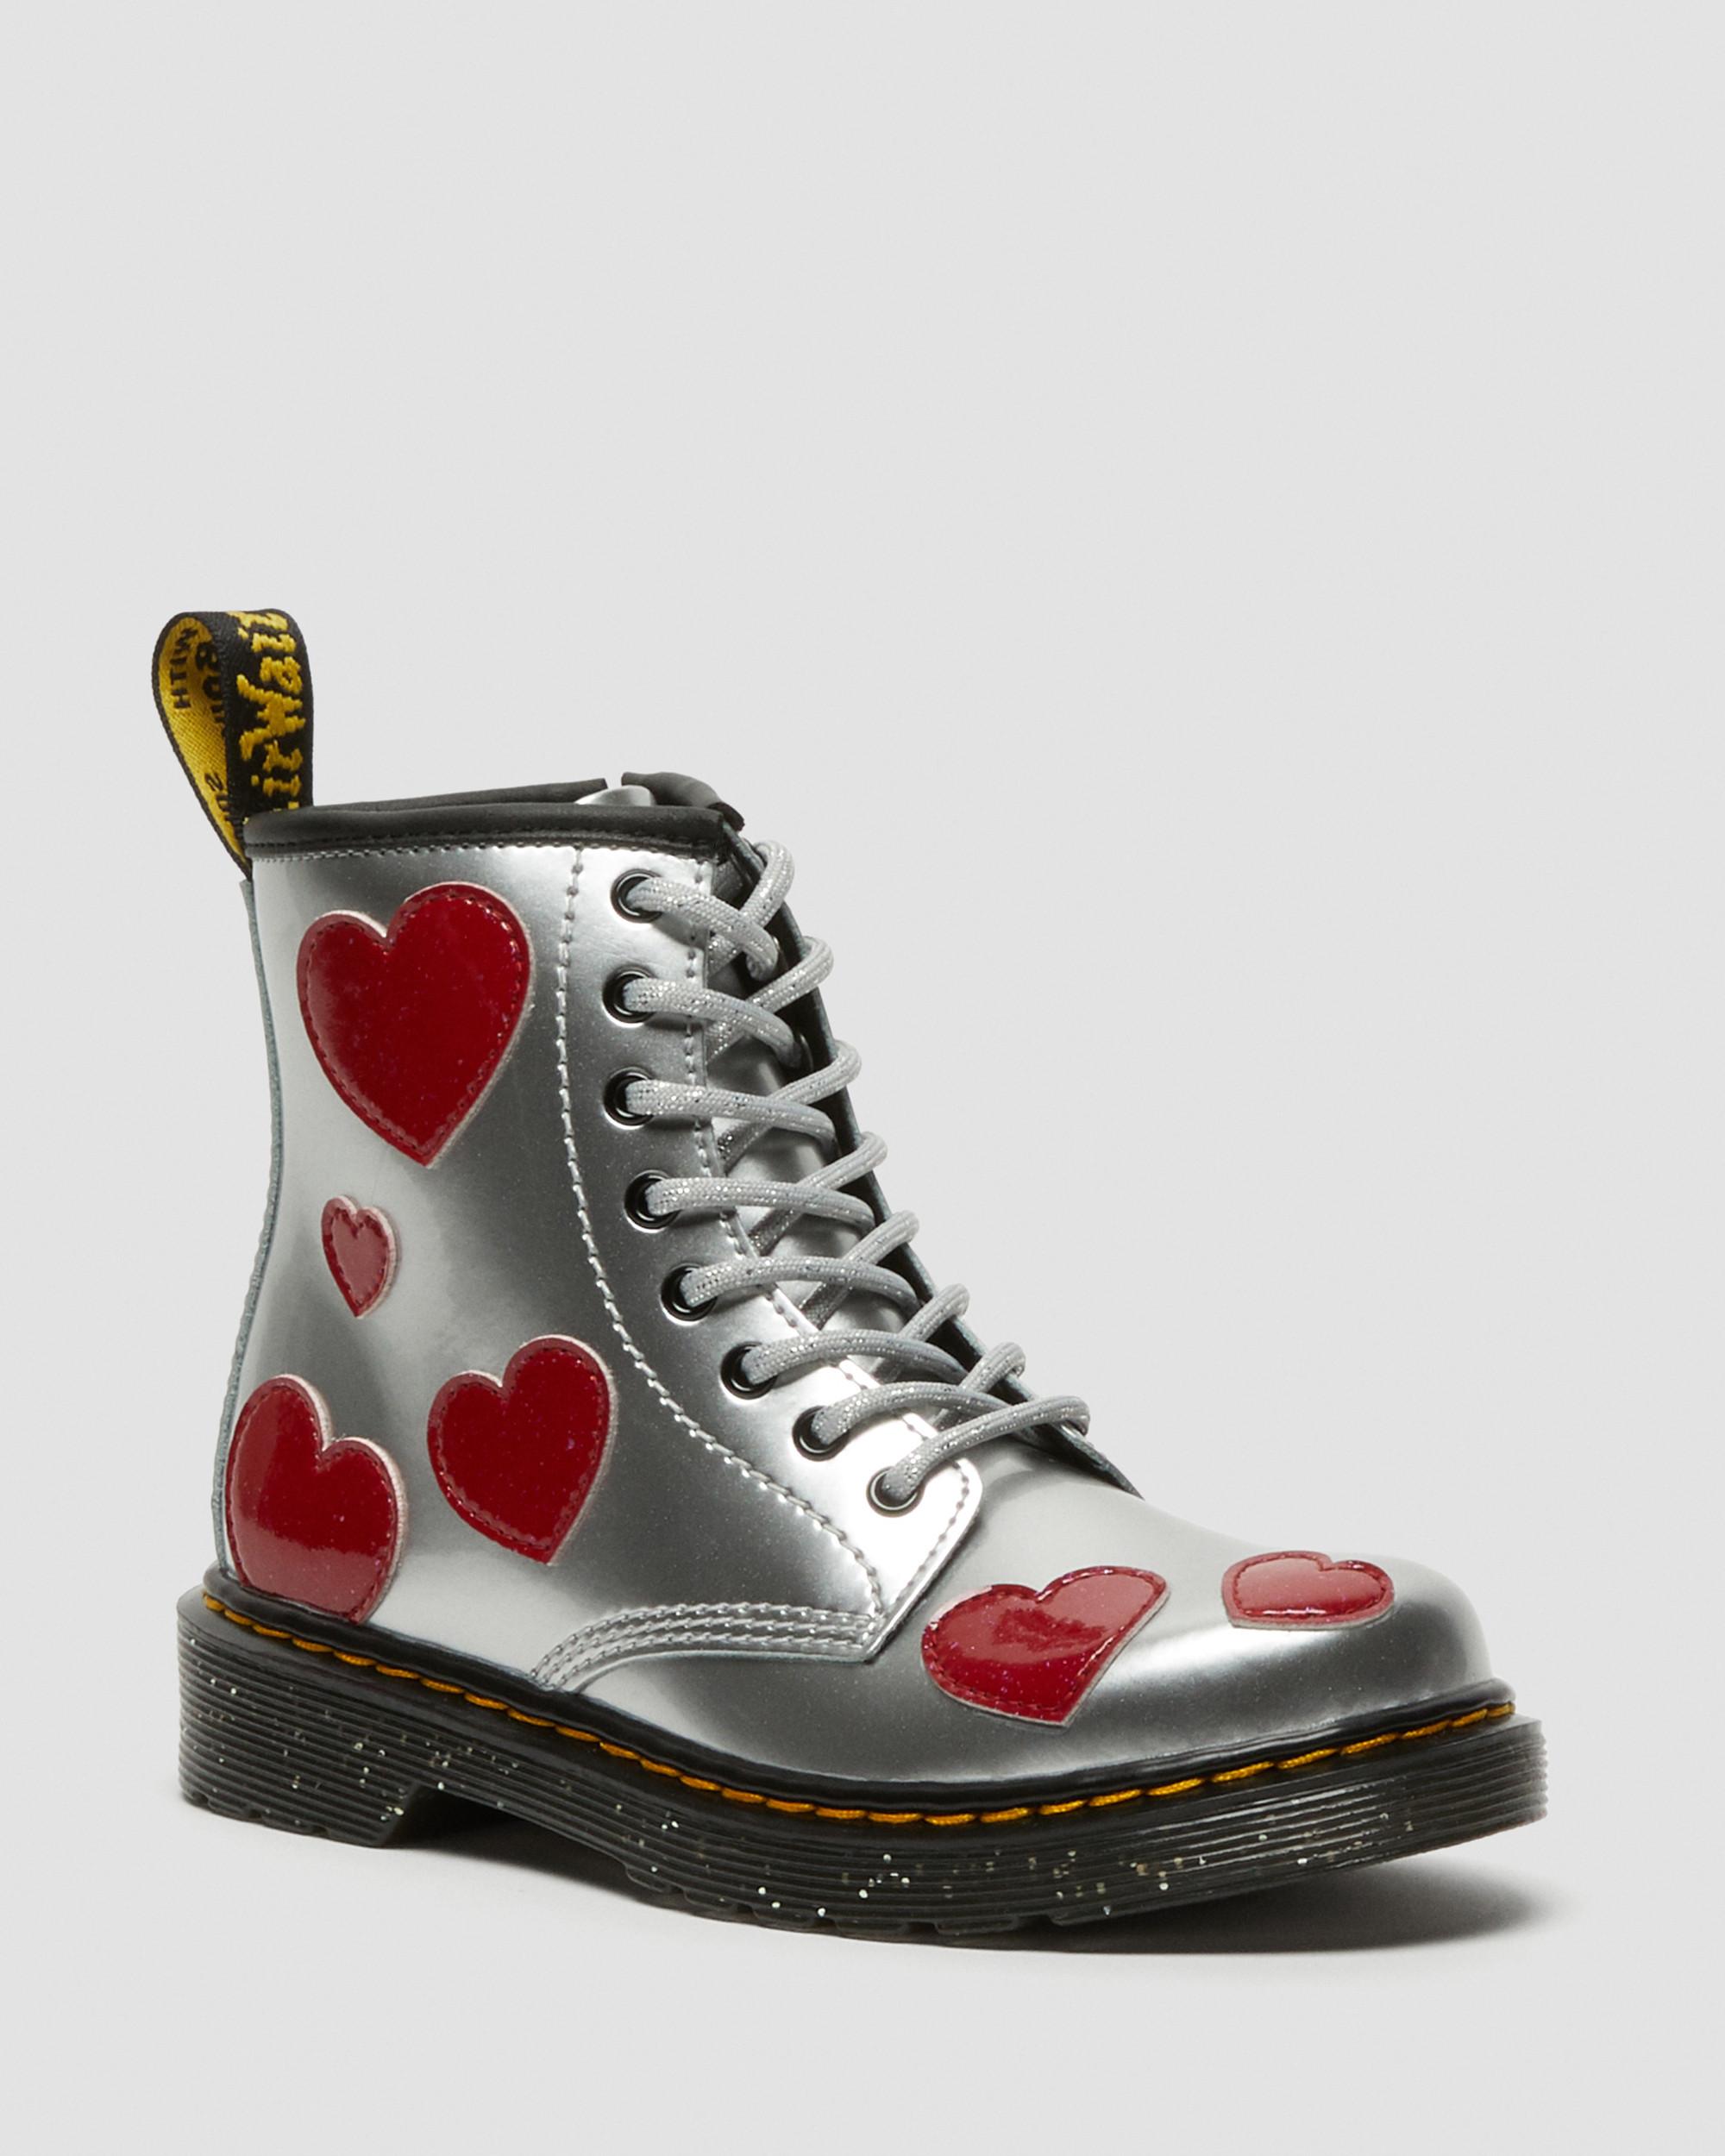 Dr. Boots Glitter Martens | Lace in Metallic Up Star 1460 Patent Junior